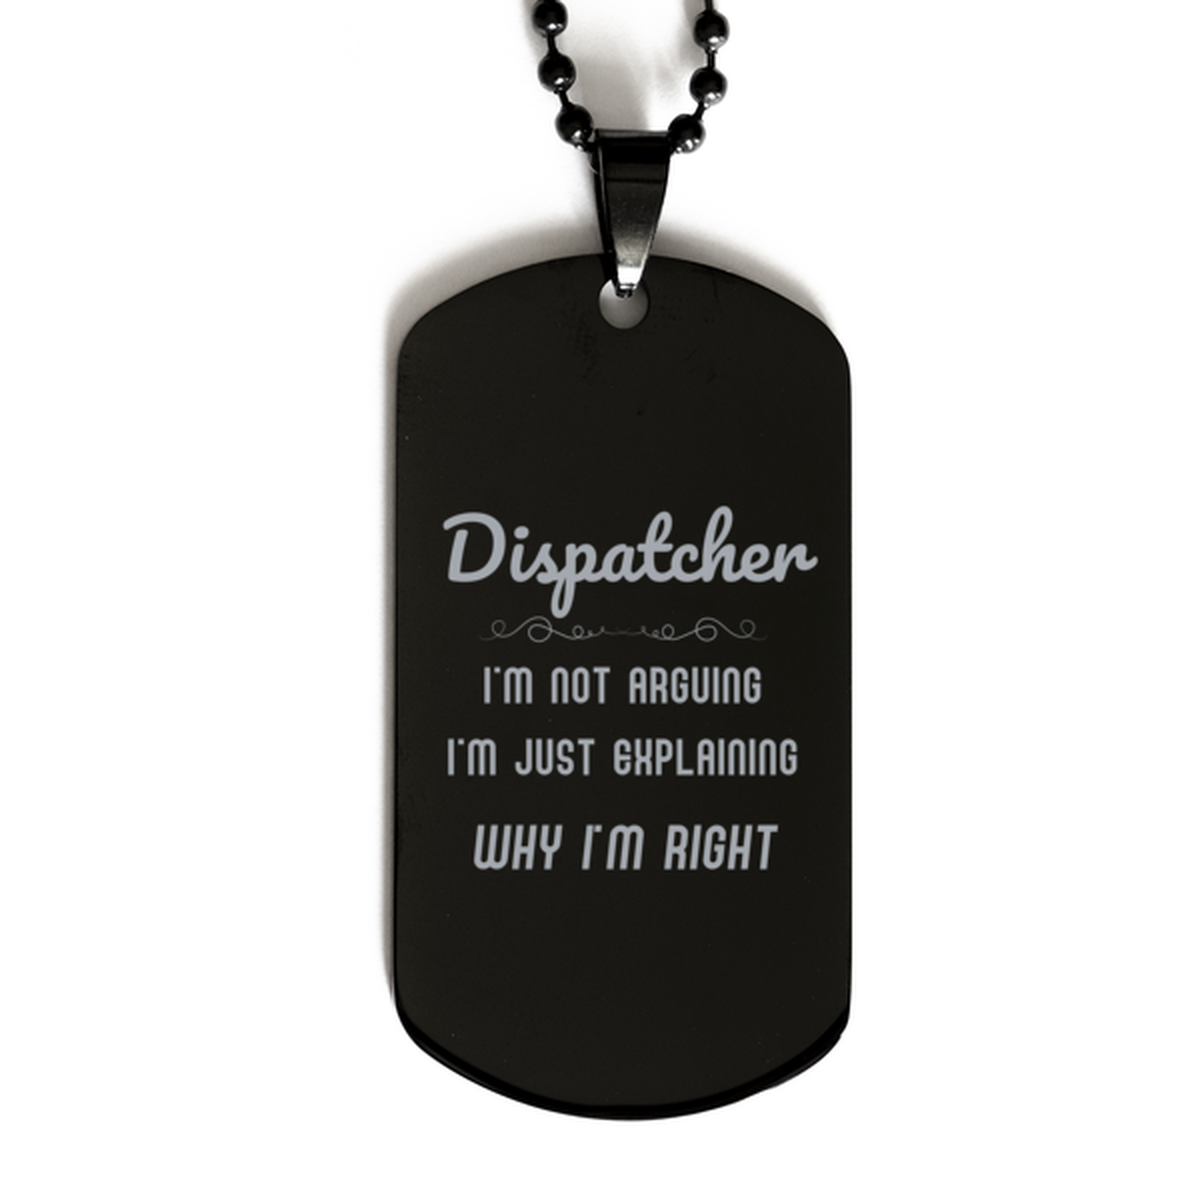 Dispatcher I'm not Arguing. I'm Just Explaining Why I'm RIGHT Black Dog Tag, Funny Saying Quote Dispatcher Gifts For Dispatcher Graduation Birthday Christmas Gifts for Men Women Coworker